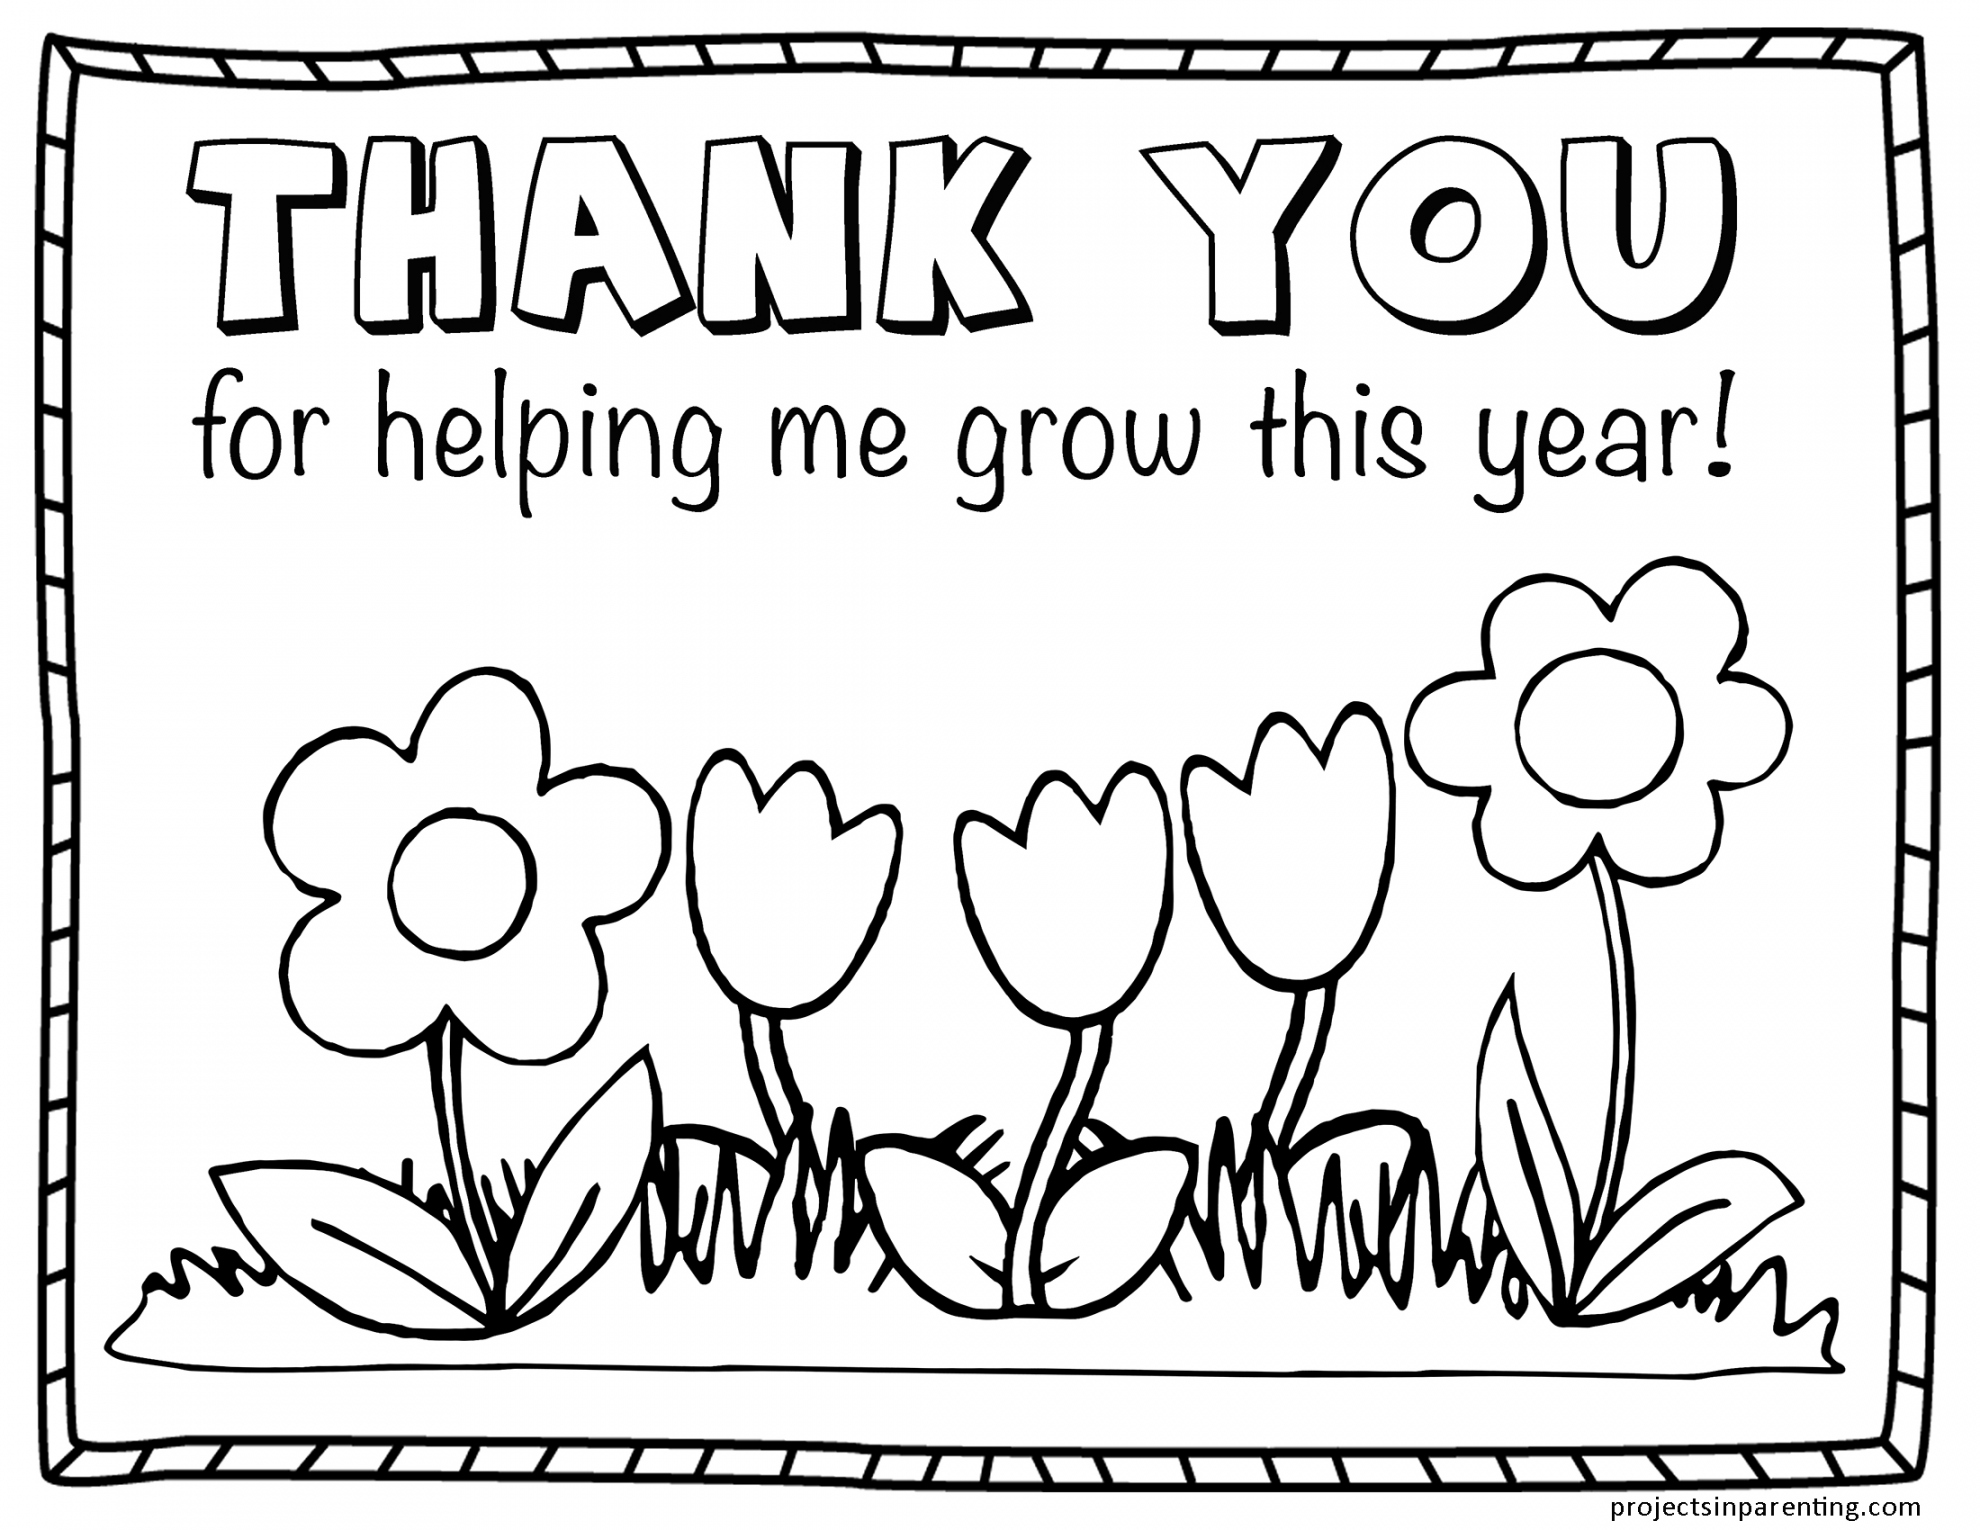 Teacher Appreciation Coloring Page  Projects In Parenting - FREE Printables - Free Printable Thank You Teacher Coloring Pages